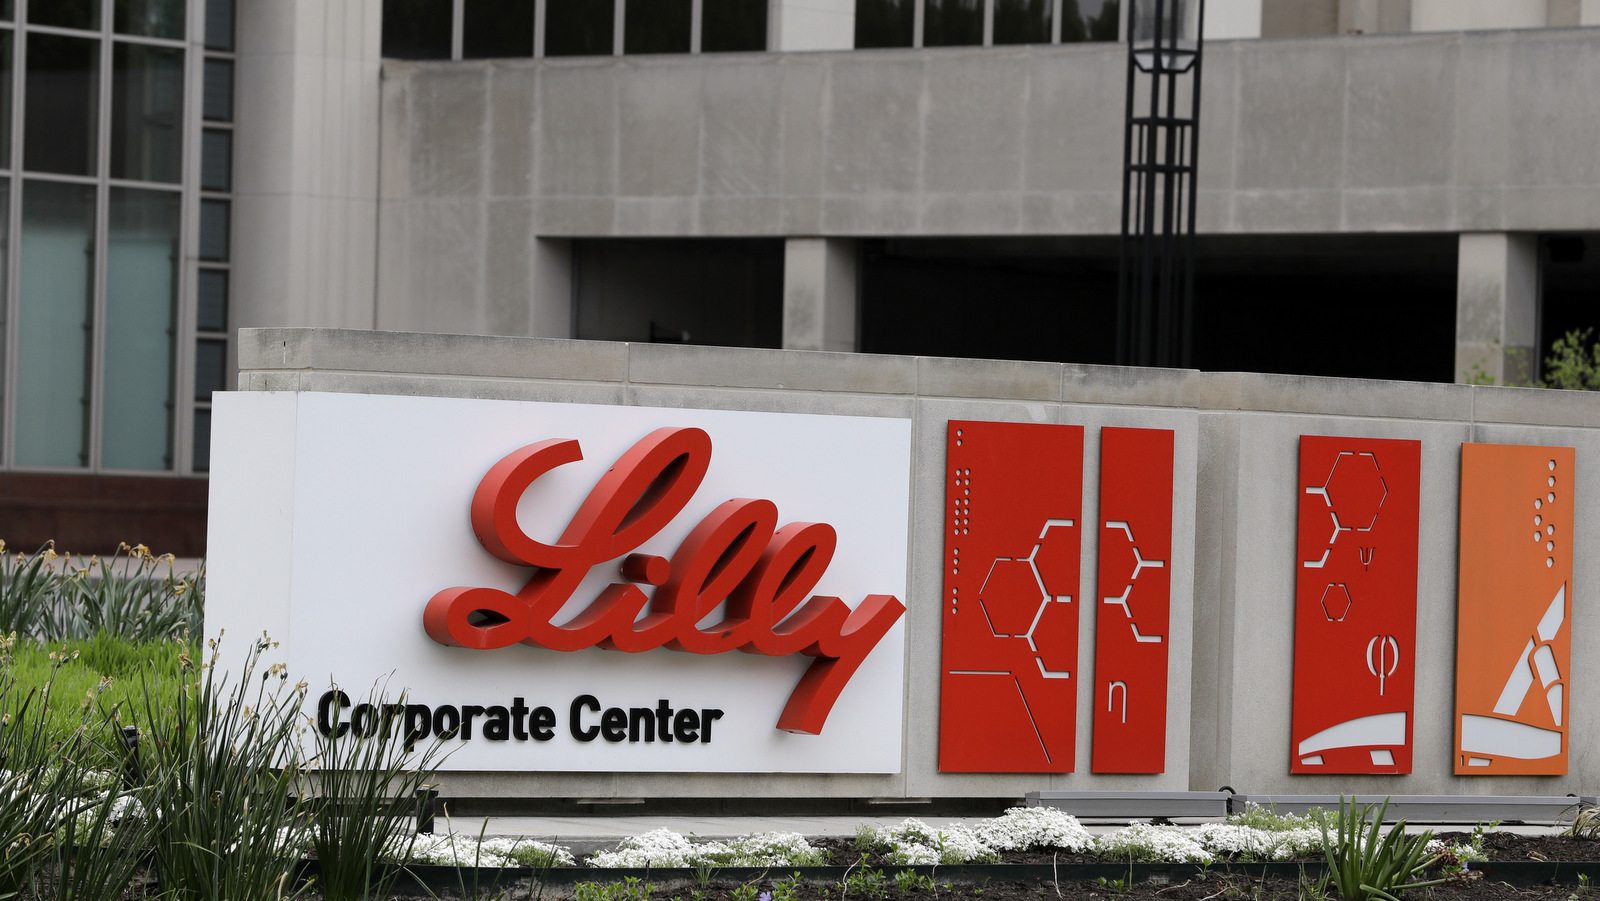 The Eli Lilly and Co corporate headquarters is pictured April 26, 2017, in Indianapolis. (AP/Darron Cummings)